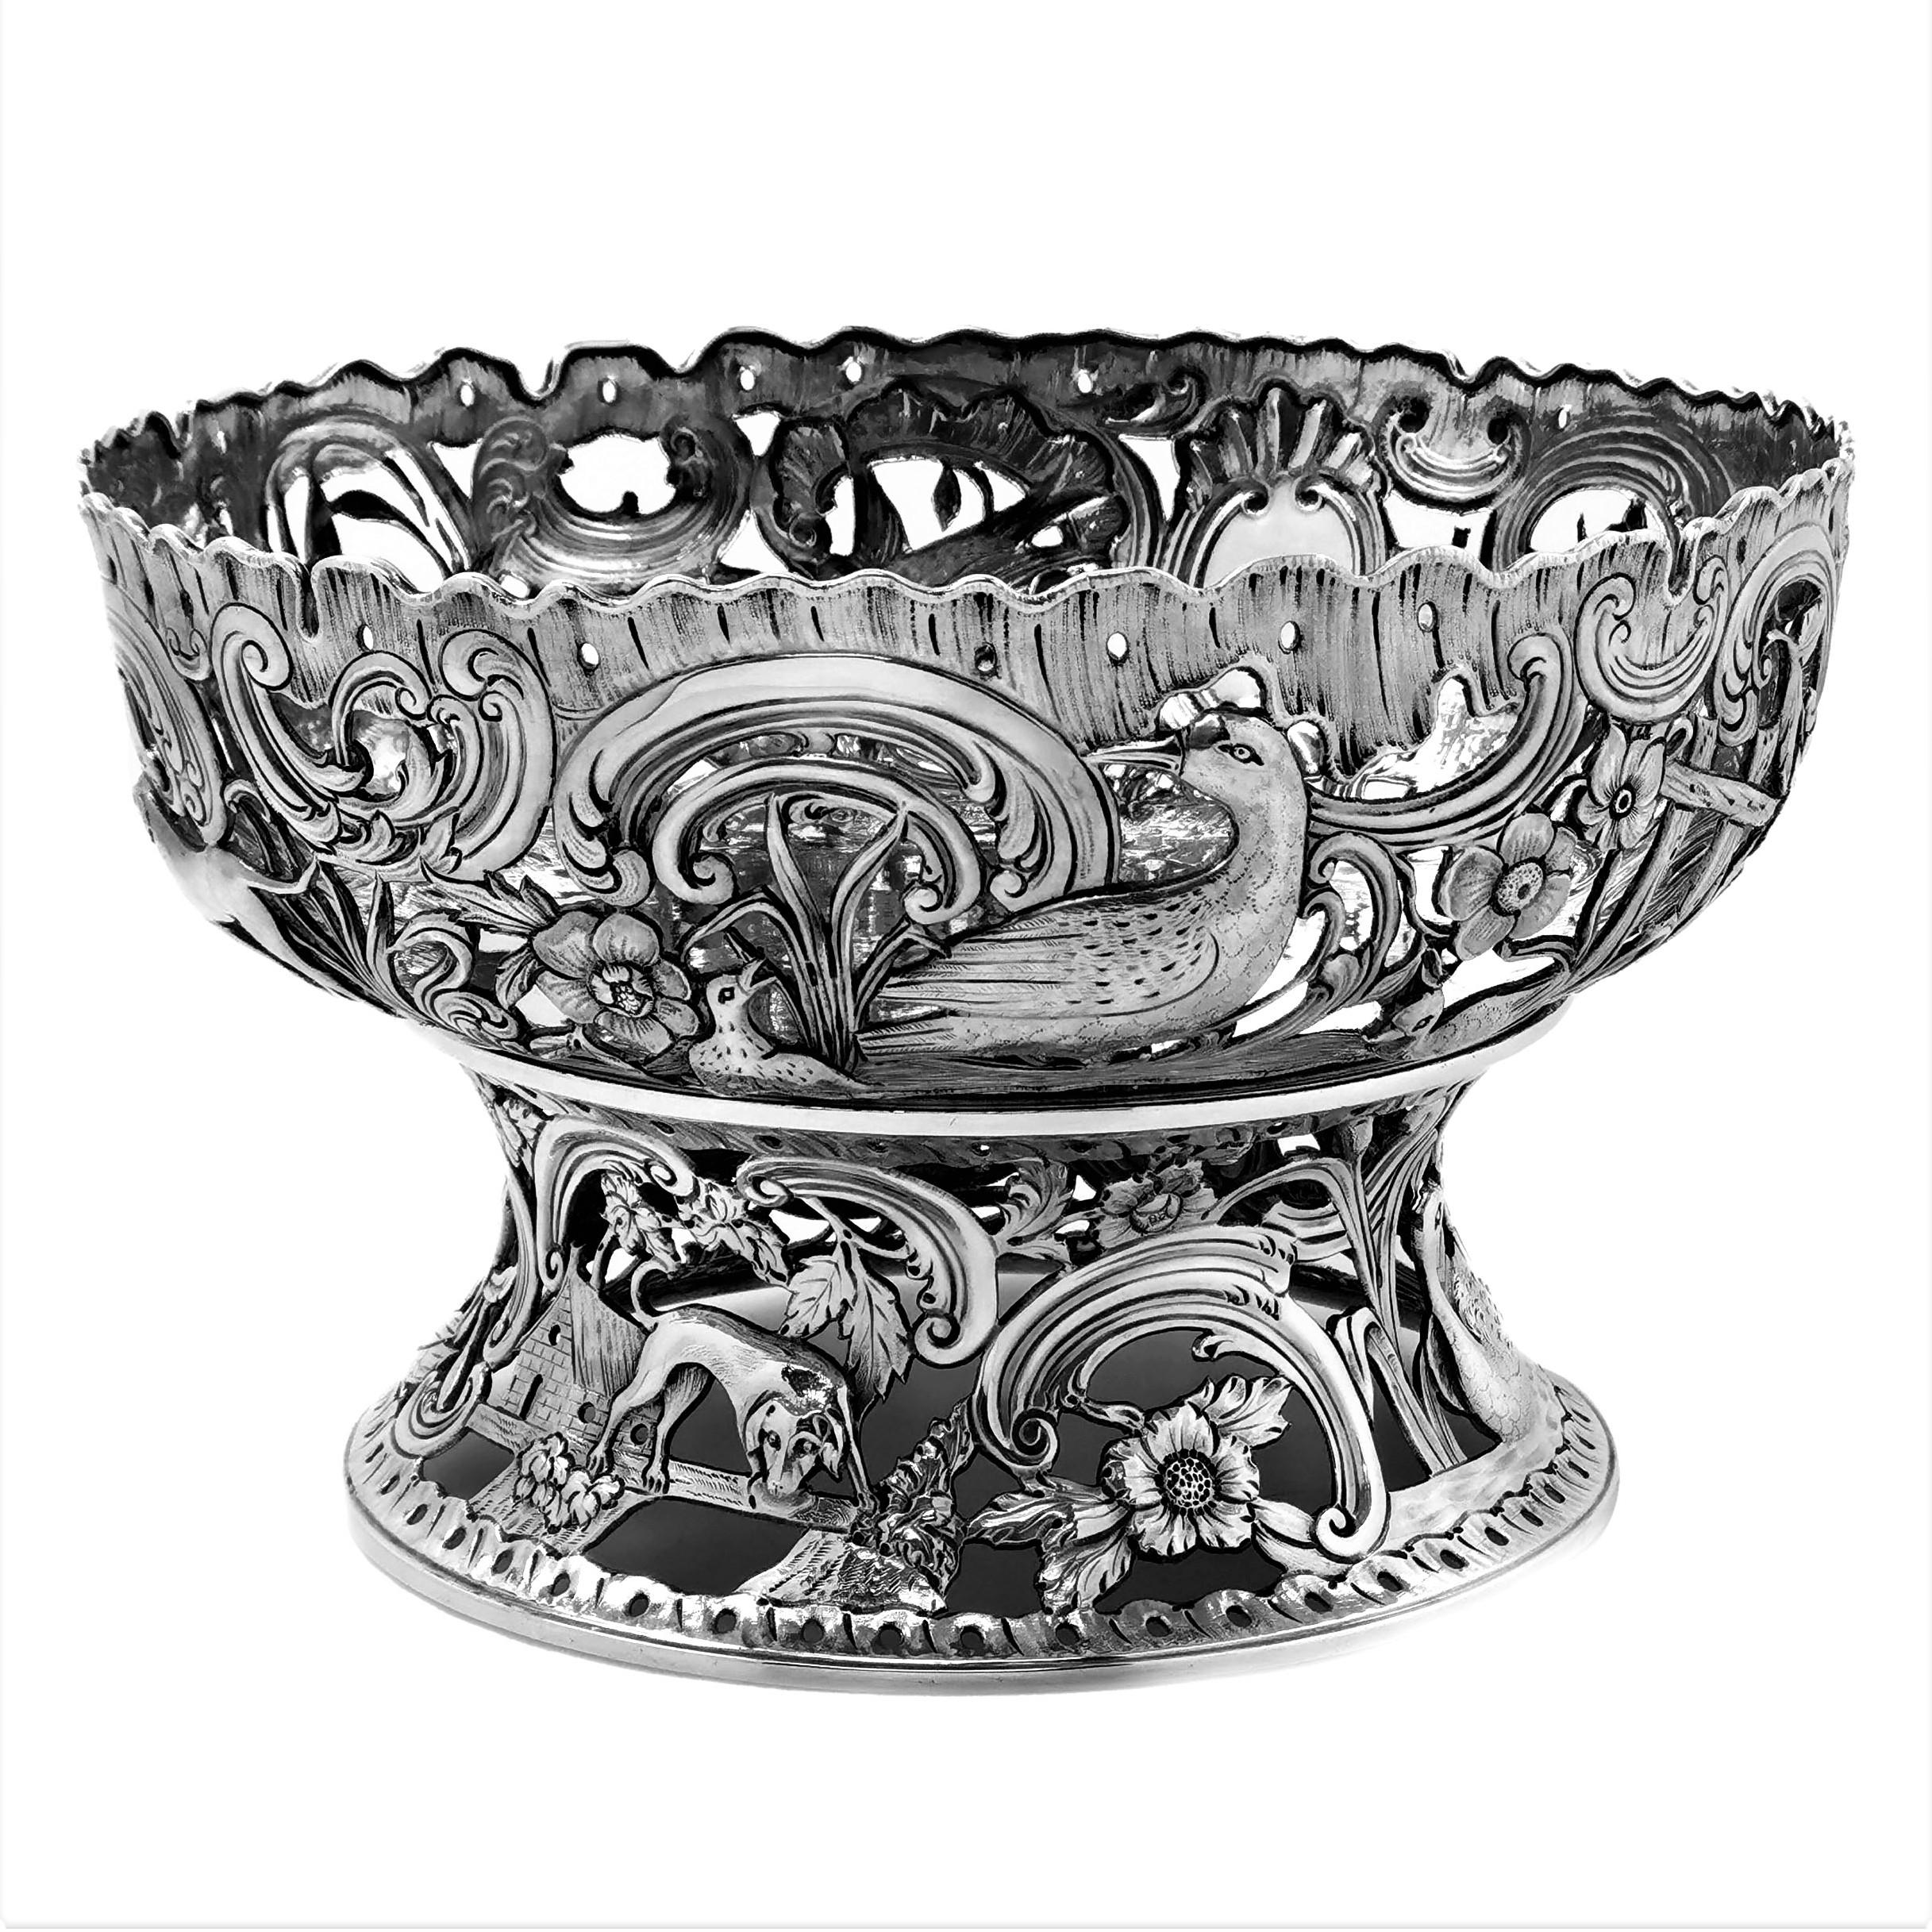 English Large Antique Victorian Silver Dish Ring and Bowl 1900 Georgian Irish Style For Sale